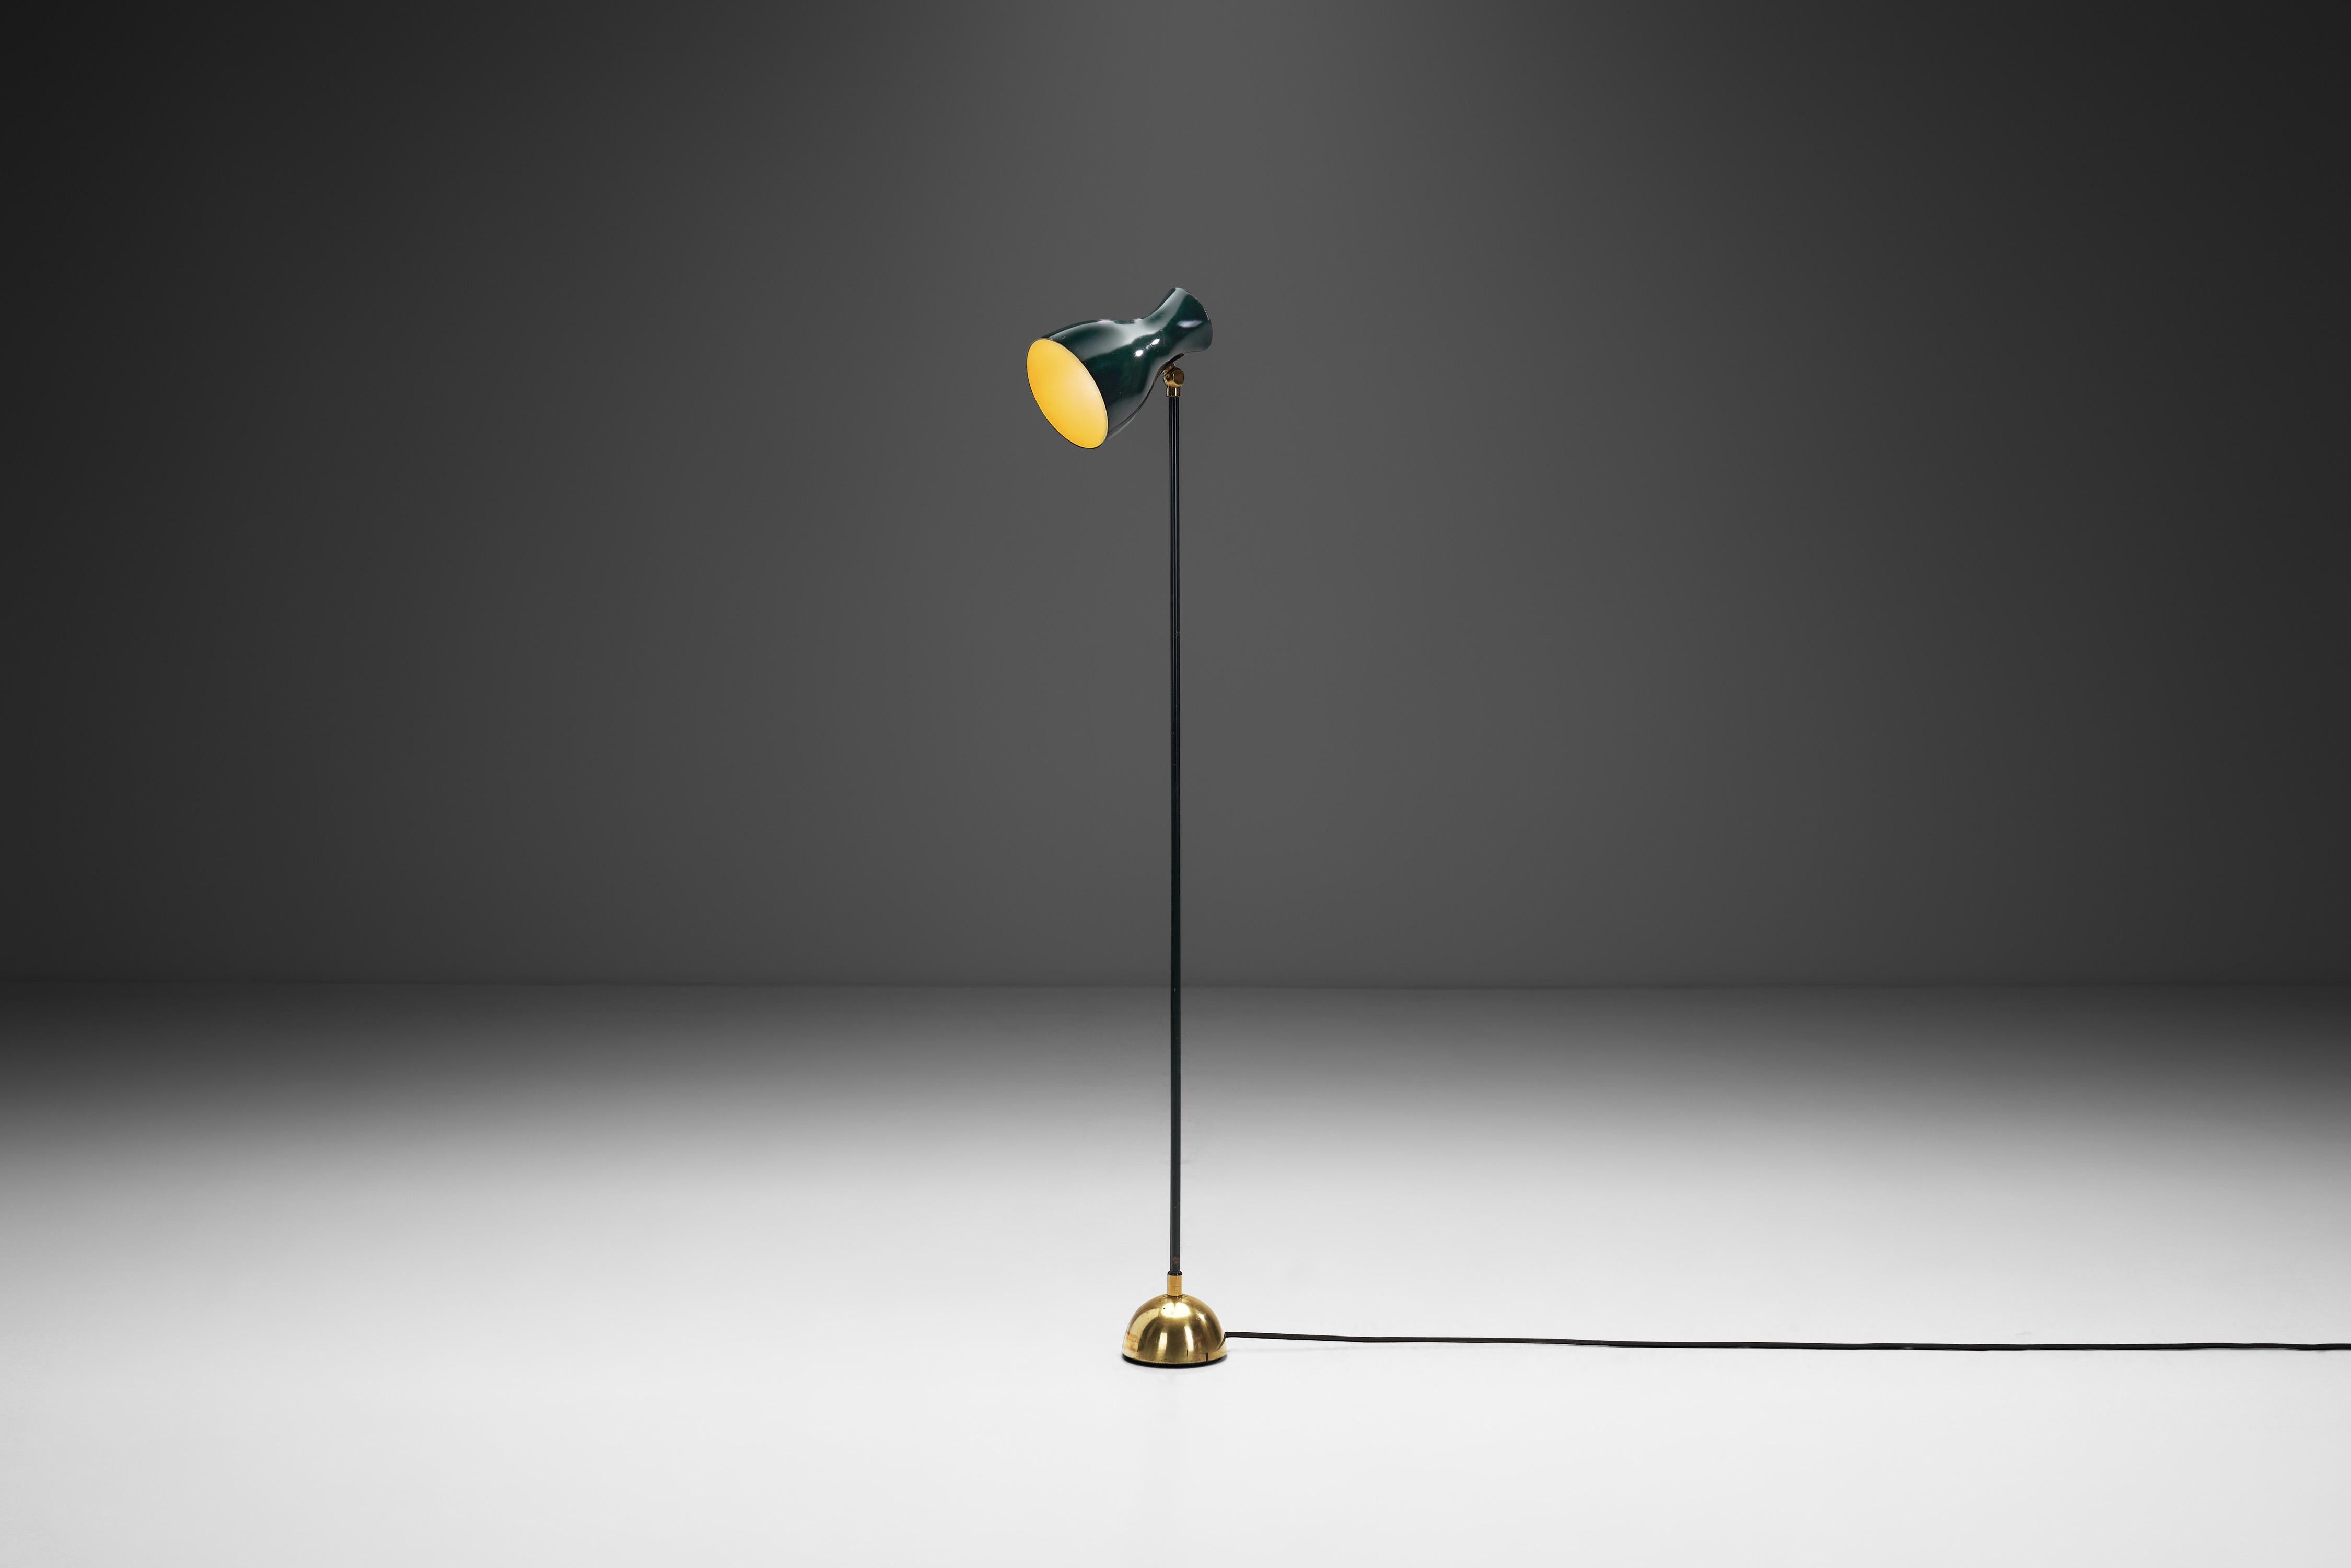 This Dieter Schulz Model “No. 57/4 16” floor lamp is a timeless design piece created in 1957 for the Swiss company, Wohnbedarf AG Schweiz. Crafted from black enamelled metal and brass, this luminary exemplifies the quintessential mid-century